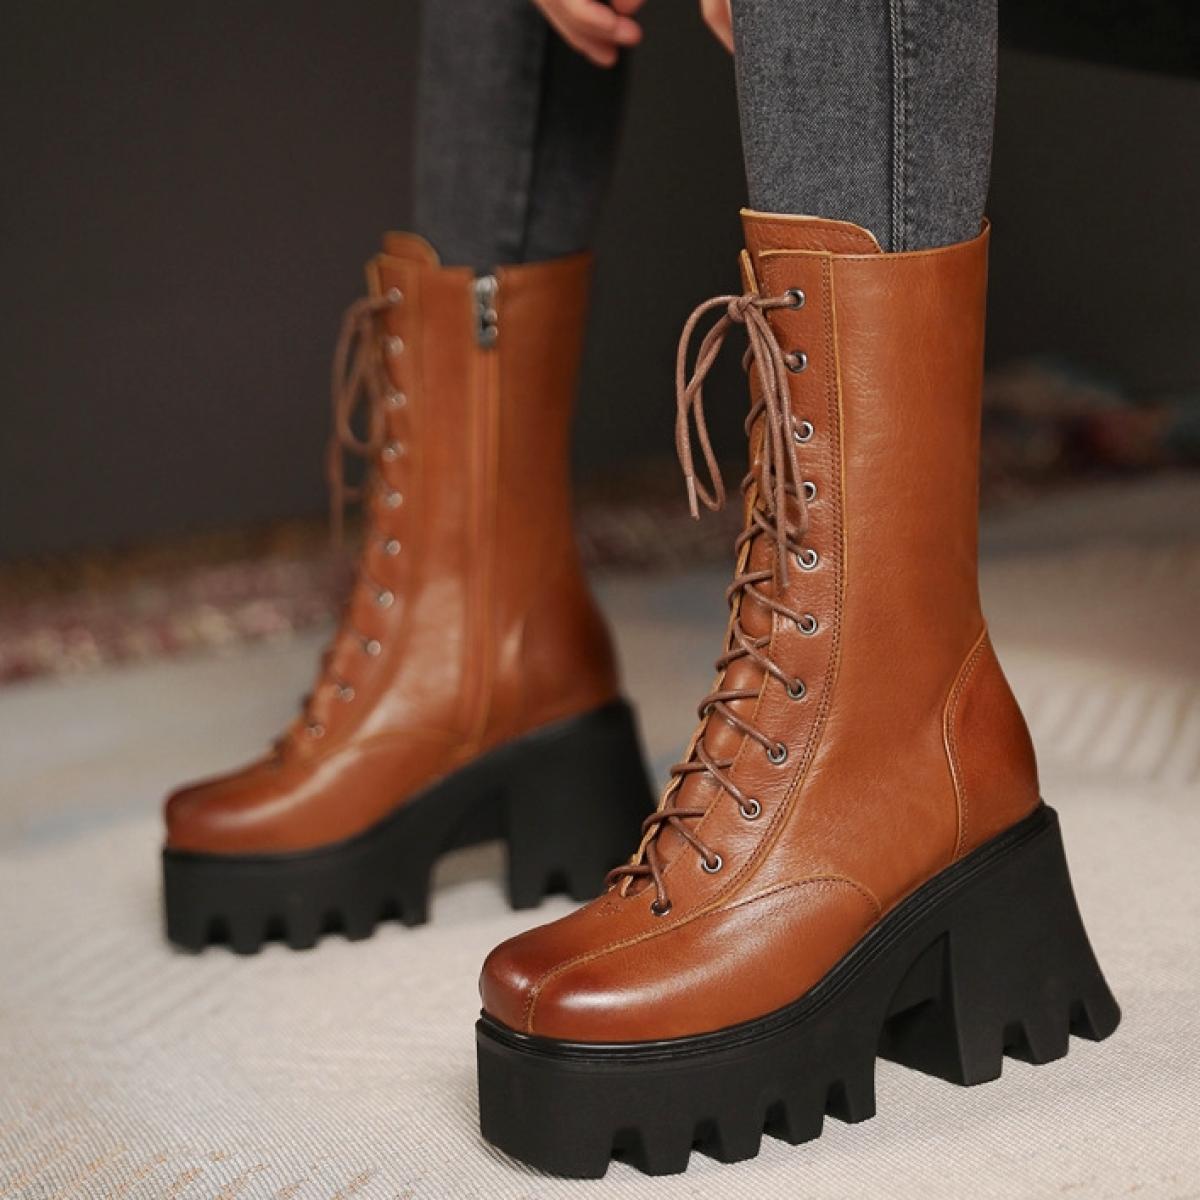 Autumn Platform Mid Calf Boots Women Genuine Leather Thick High Heels Motorcycle Boots Female Square Toe Fashion Shoes E